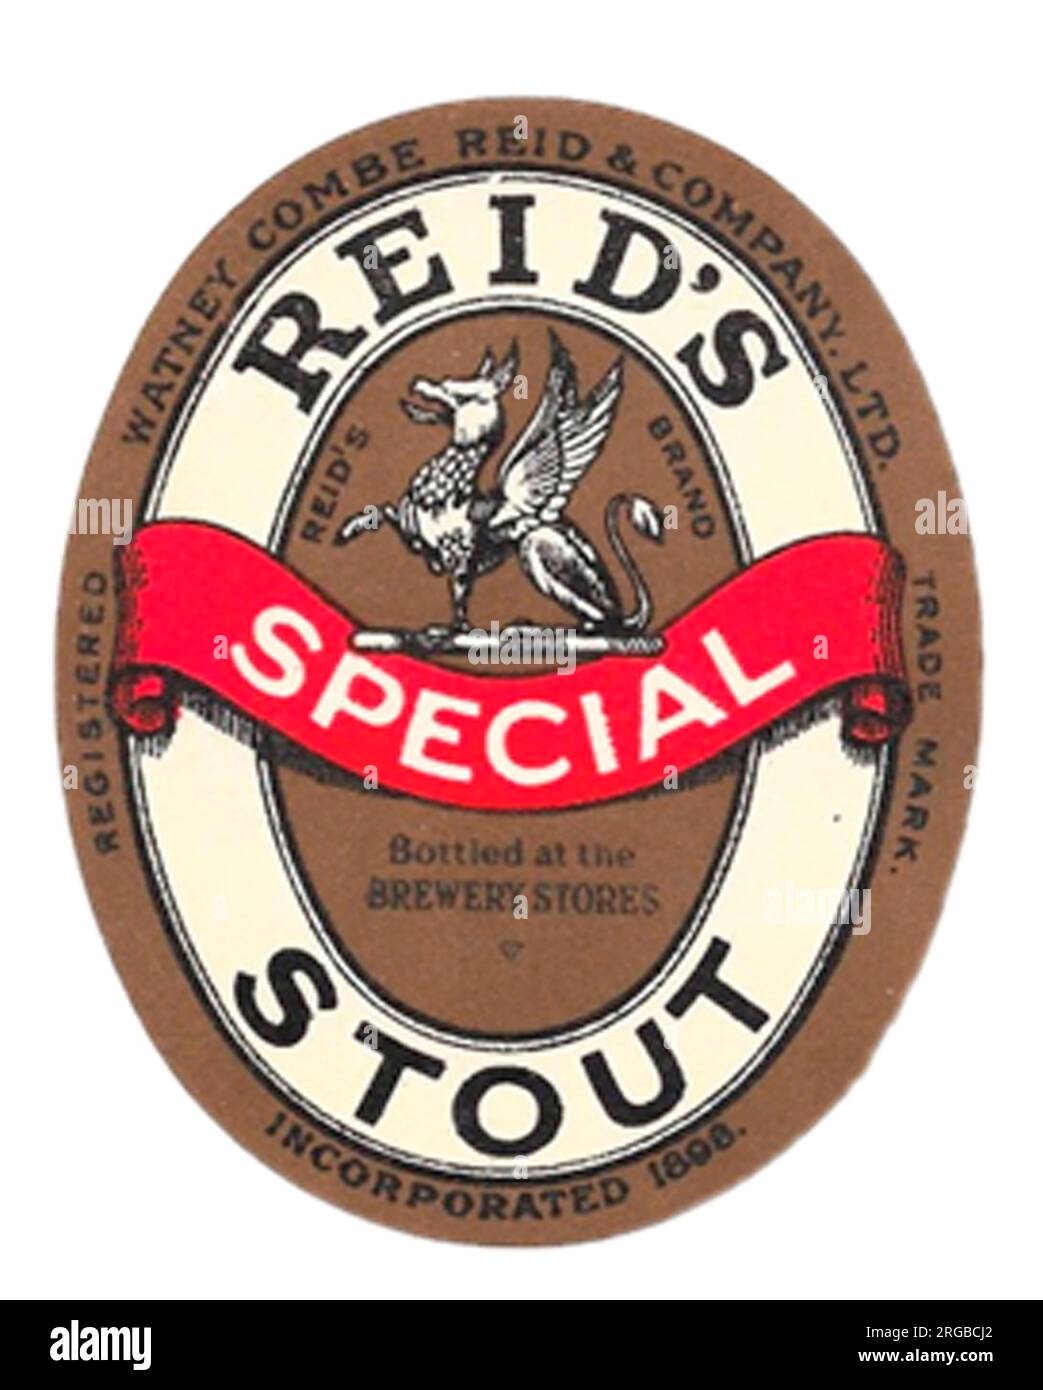 Reid's Special Stout Bottled at Brewery Label Stock Photo